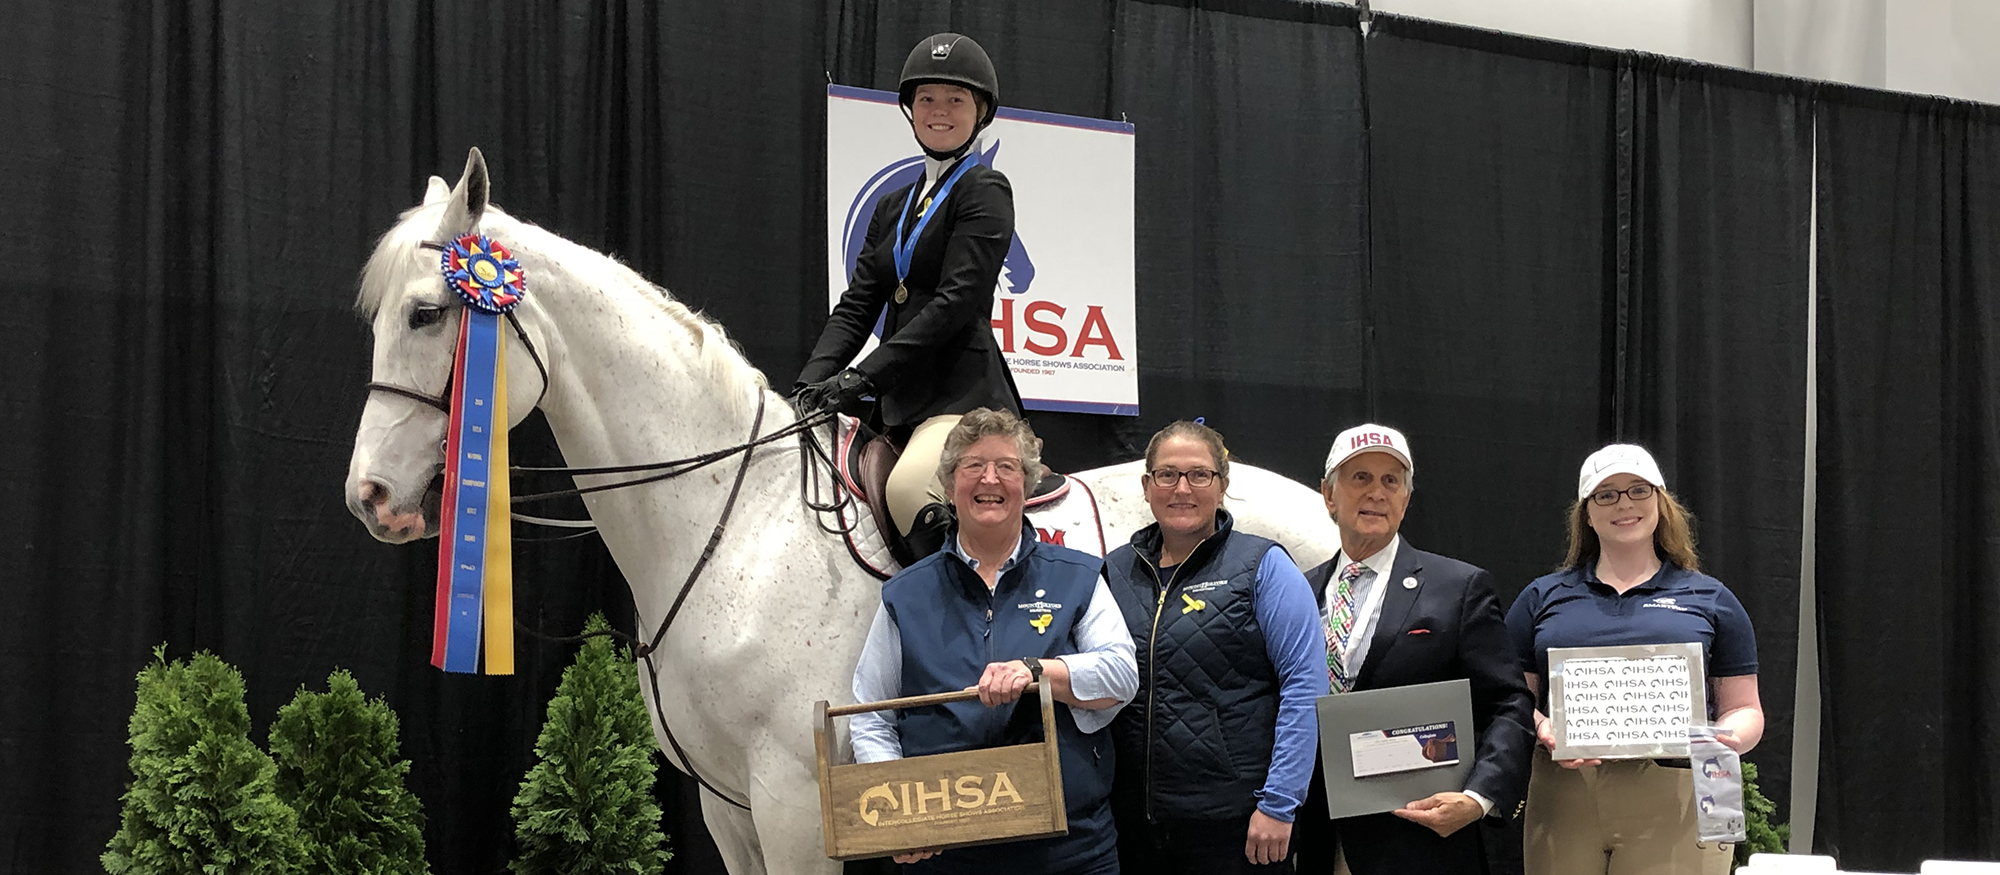 Sophomore Sara Hearn in the winner's circle with Head Coach CJ Law, Assistant Coach Morgan Lynch, IHSA President Bob Cacchione and an attendant after winning the Individual Intermediate Over Fences National Championship on May 2, 2019.